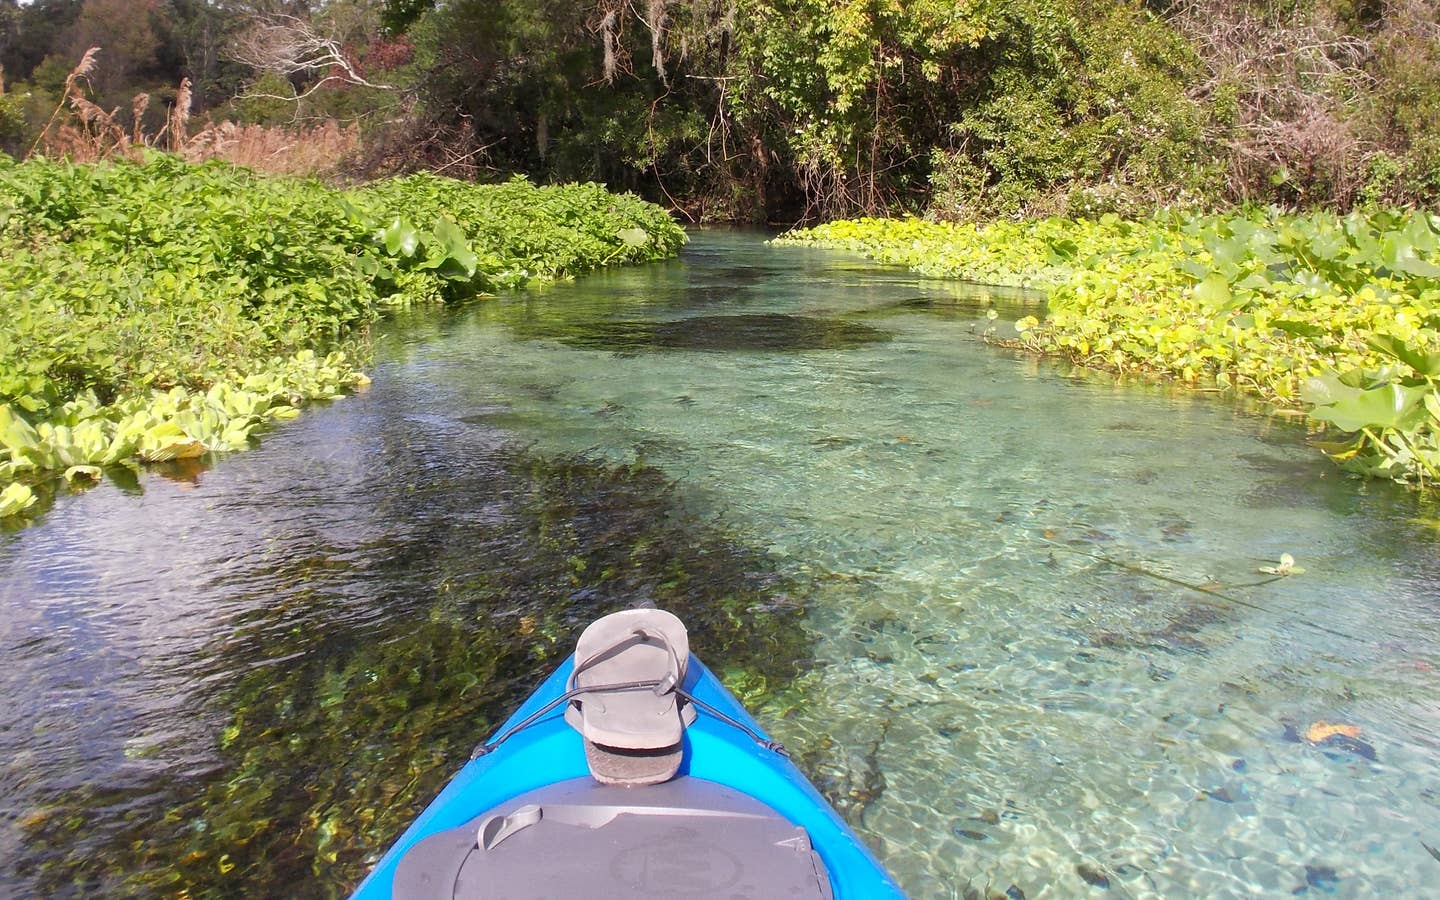 Kayak in a river surrounded by plant life